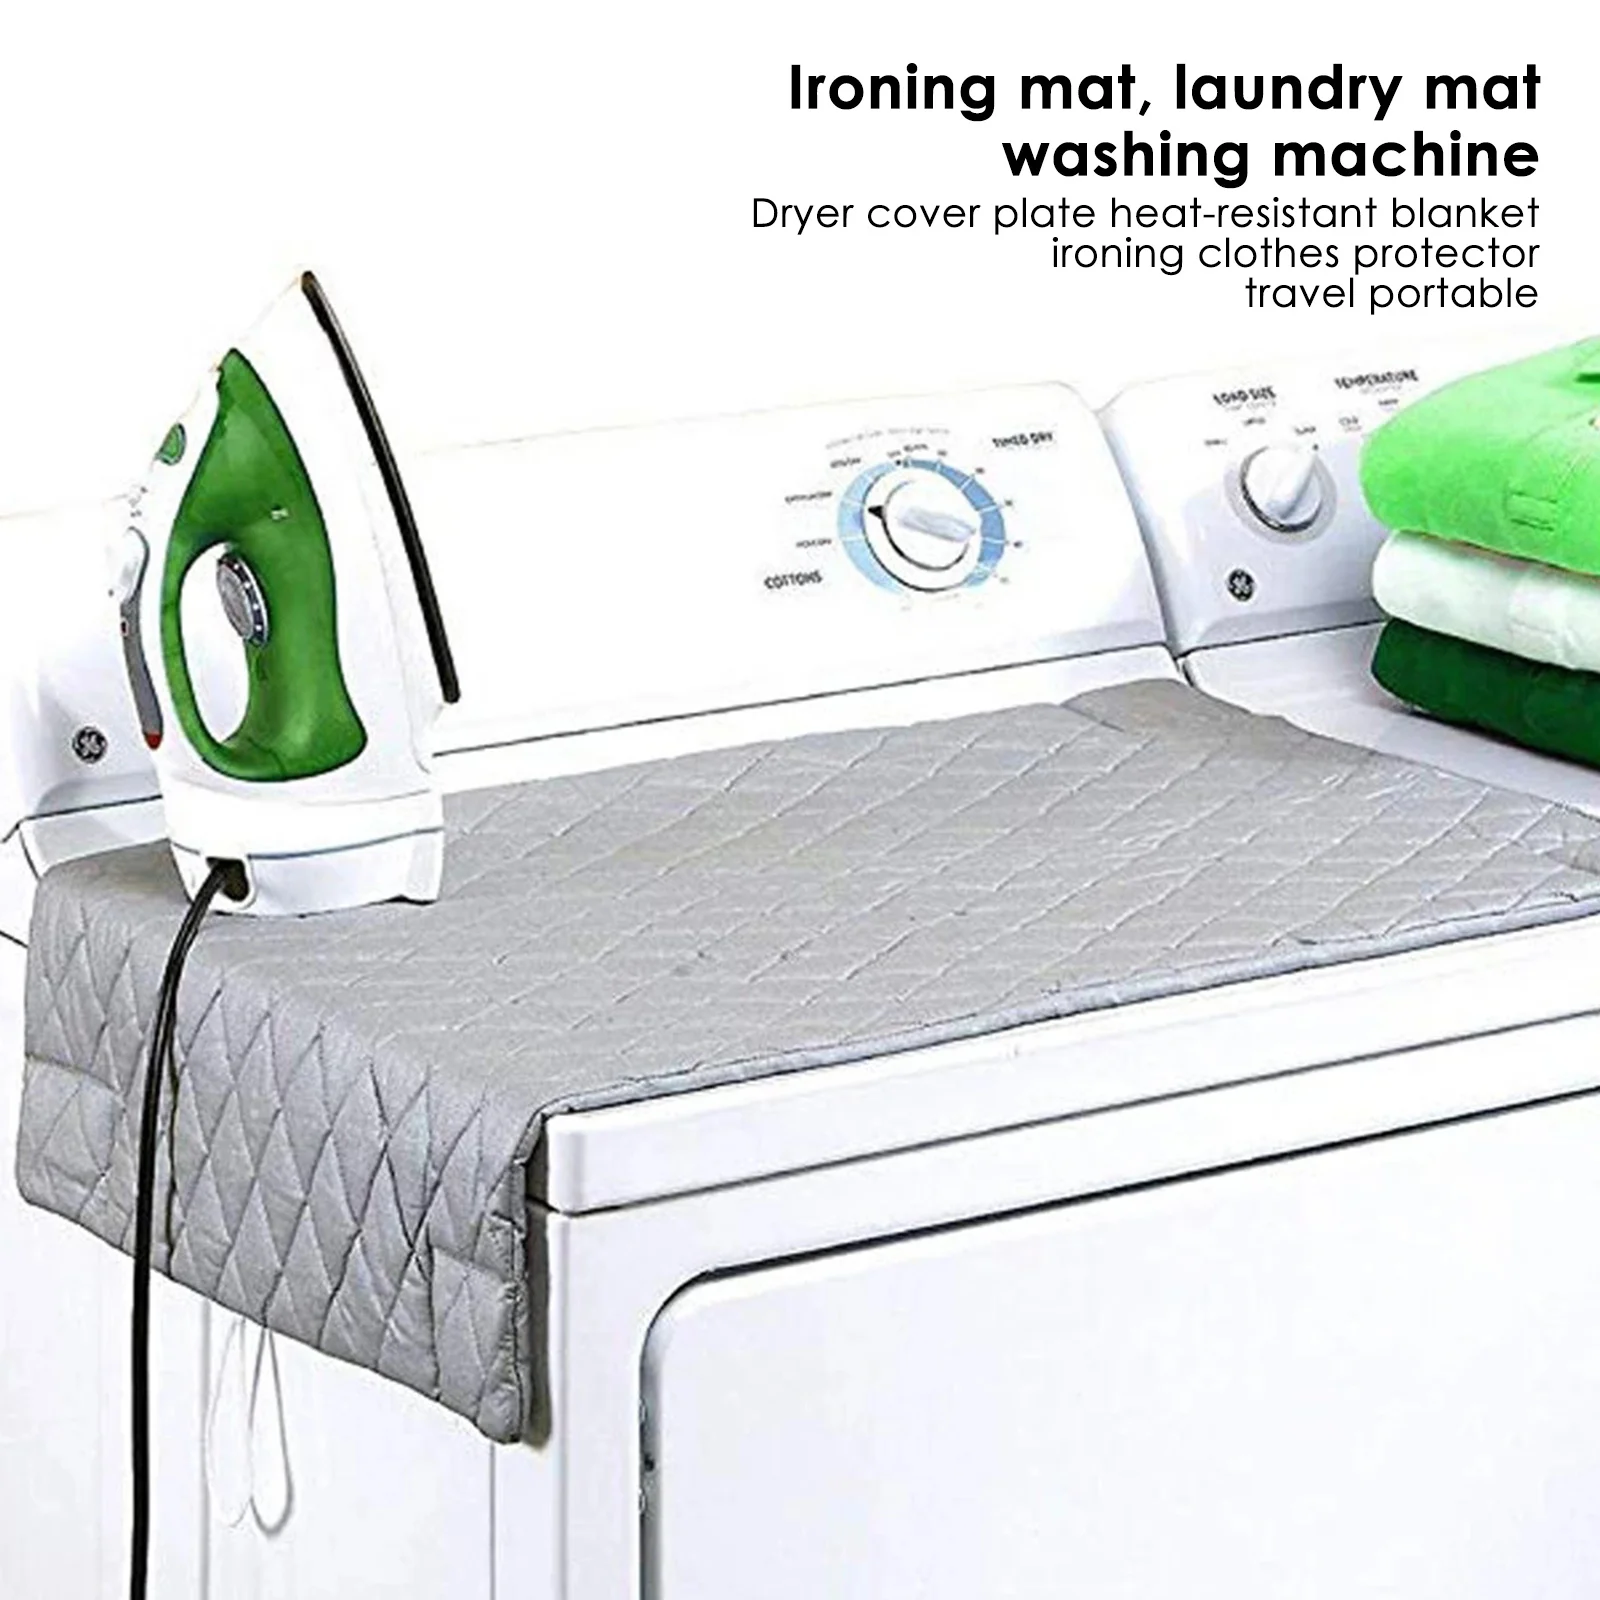 

Ironing Mat Laundry Pad Washer Dryer Cover Board Heat Resistant Blanket Press Clothes Protector Travel Portable